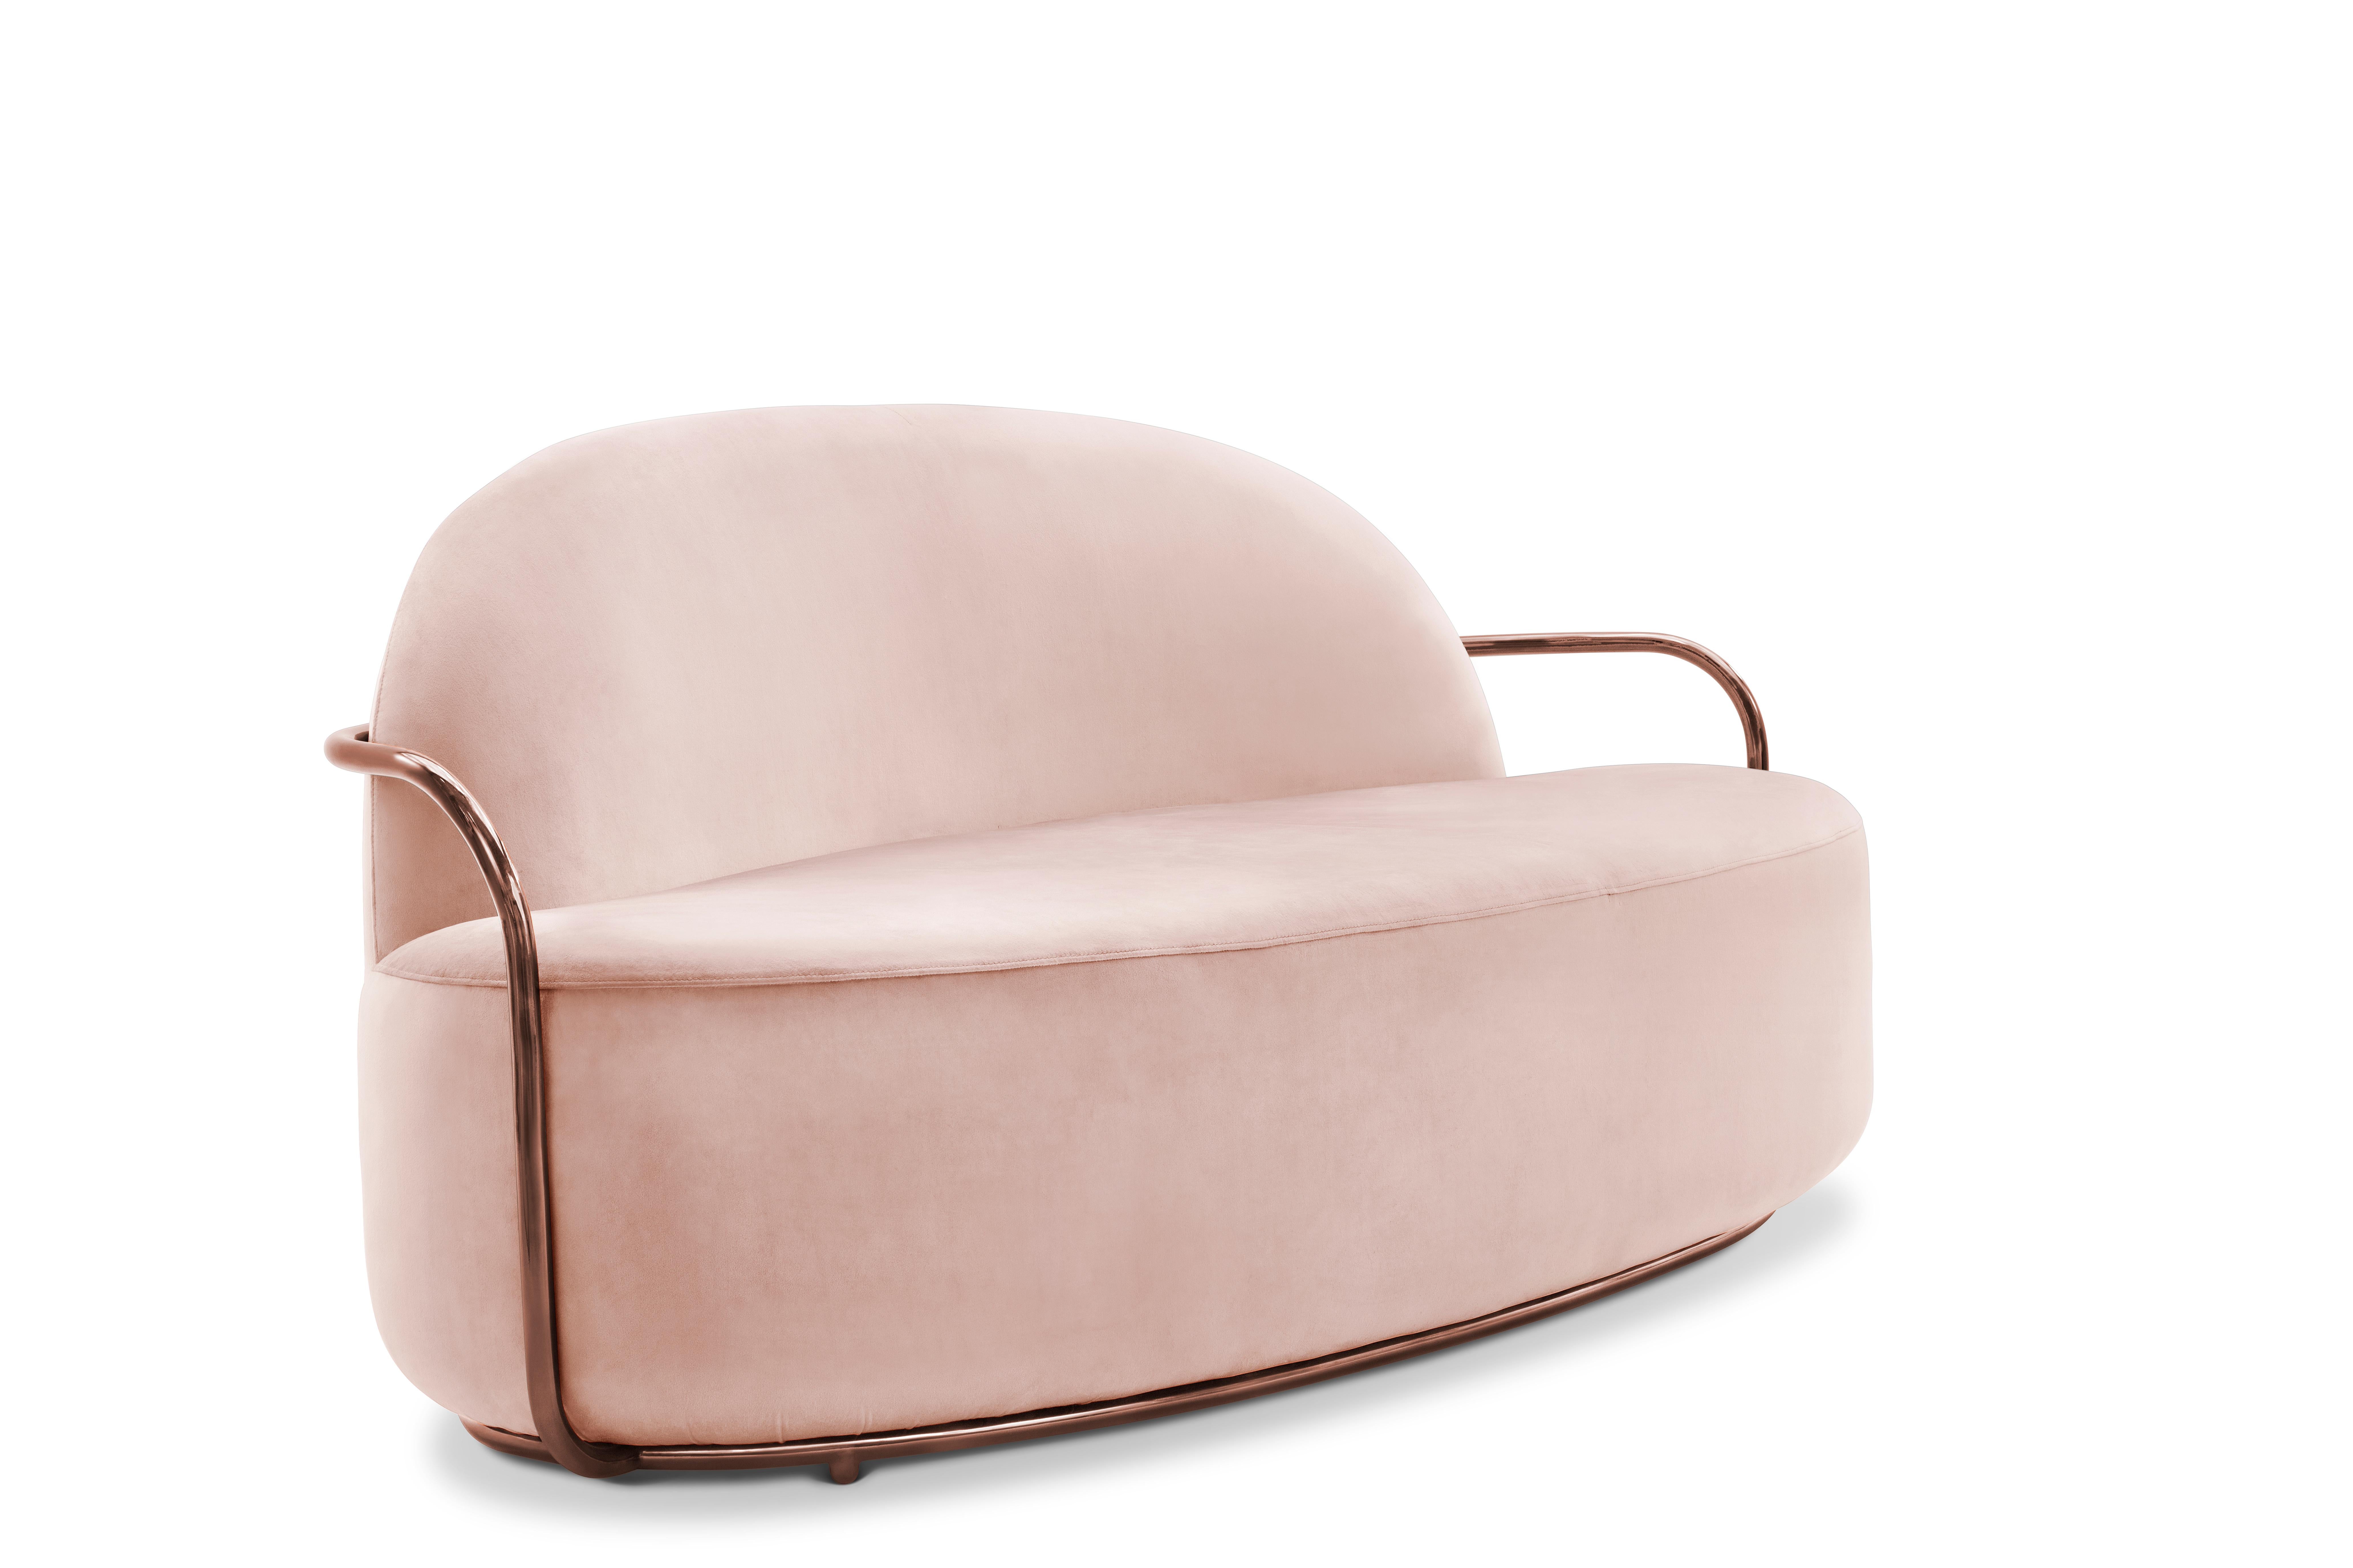 Orion 3 Seat Sofa with Plush Pink Velvet and Rose Gold Arms by Nika Zupanc makes a pretty picture in pale pink velvet and rich rose gold metal arms.

Nika Zupanc, a strikingly renowned Slovenian designer, never shies away from redefining the status